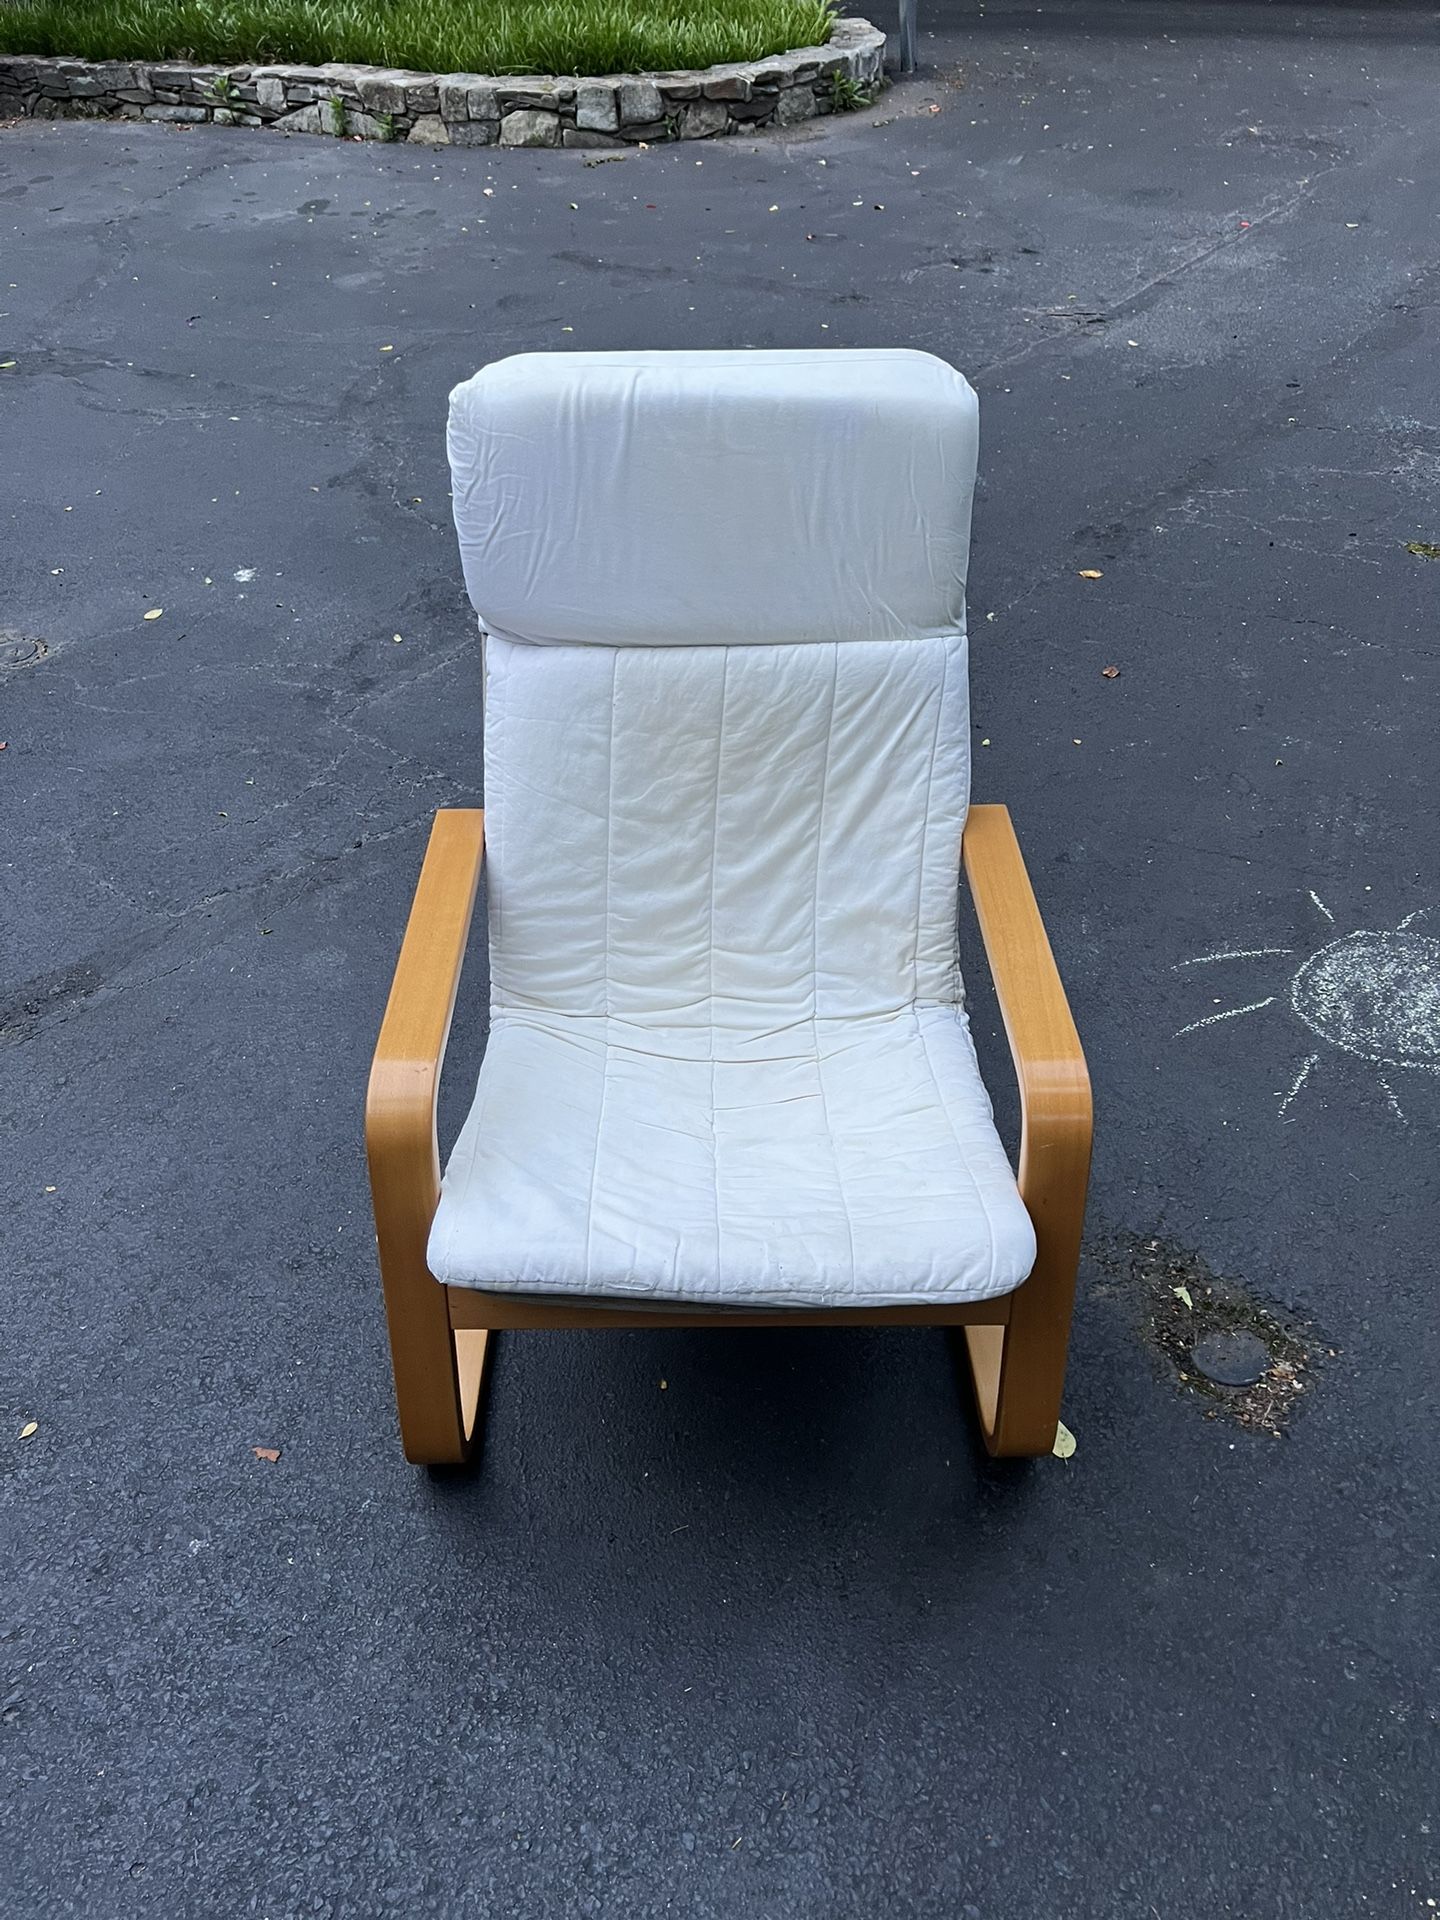 Brown Wood Chair With White Cushion